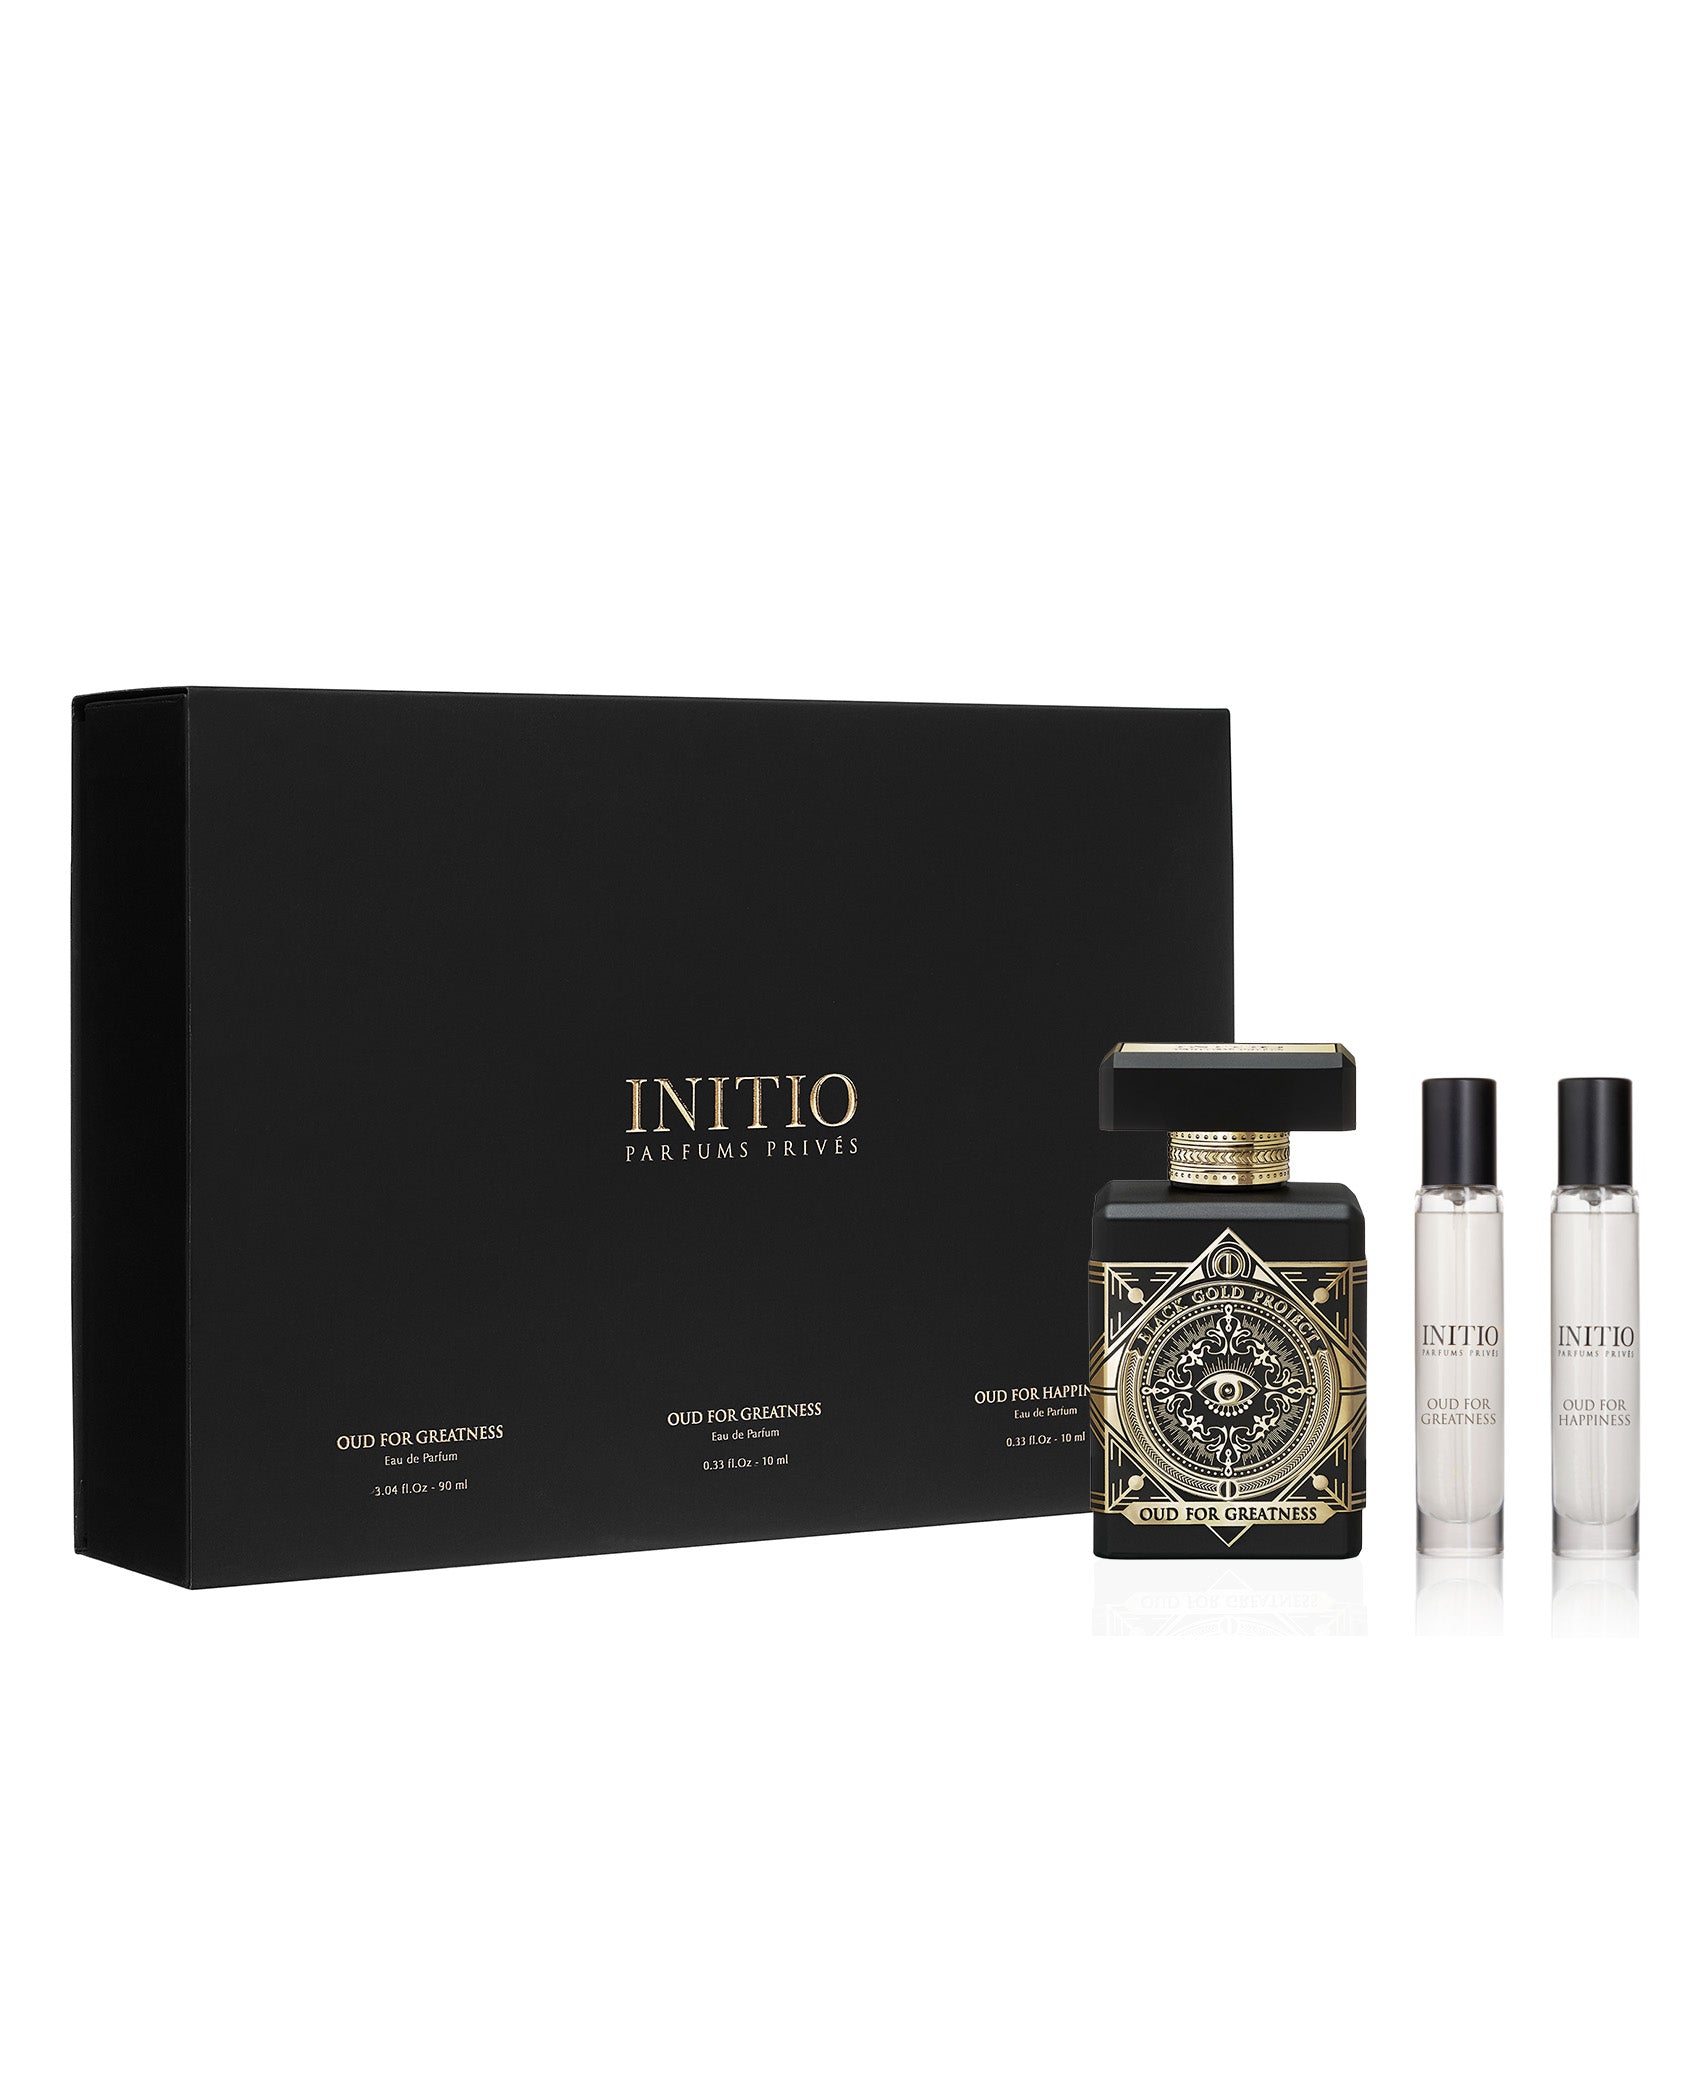 OUD FOR GREATNESS LIMITED EDITION SET – INITIO Parfums Privés US